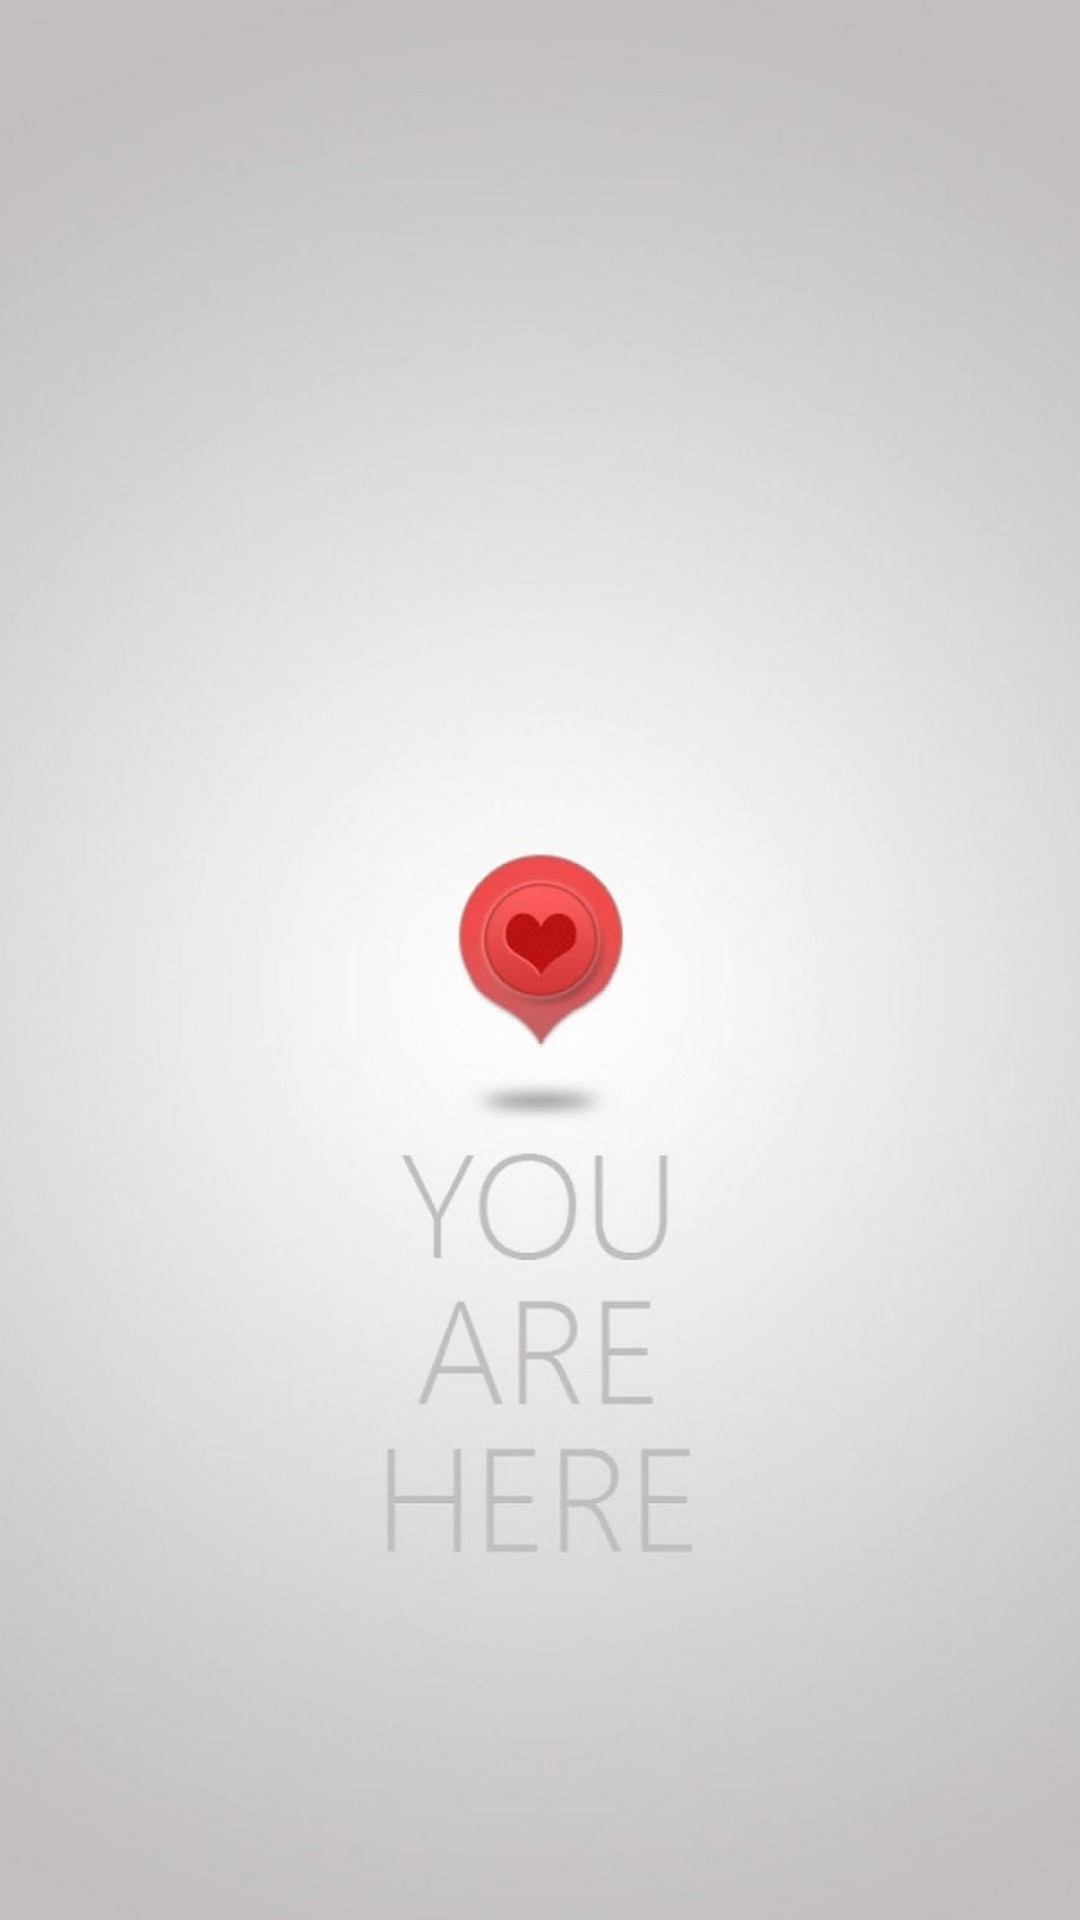 You are in my Heart Valentines day iPhone wallpaper resolution 1080x1920